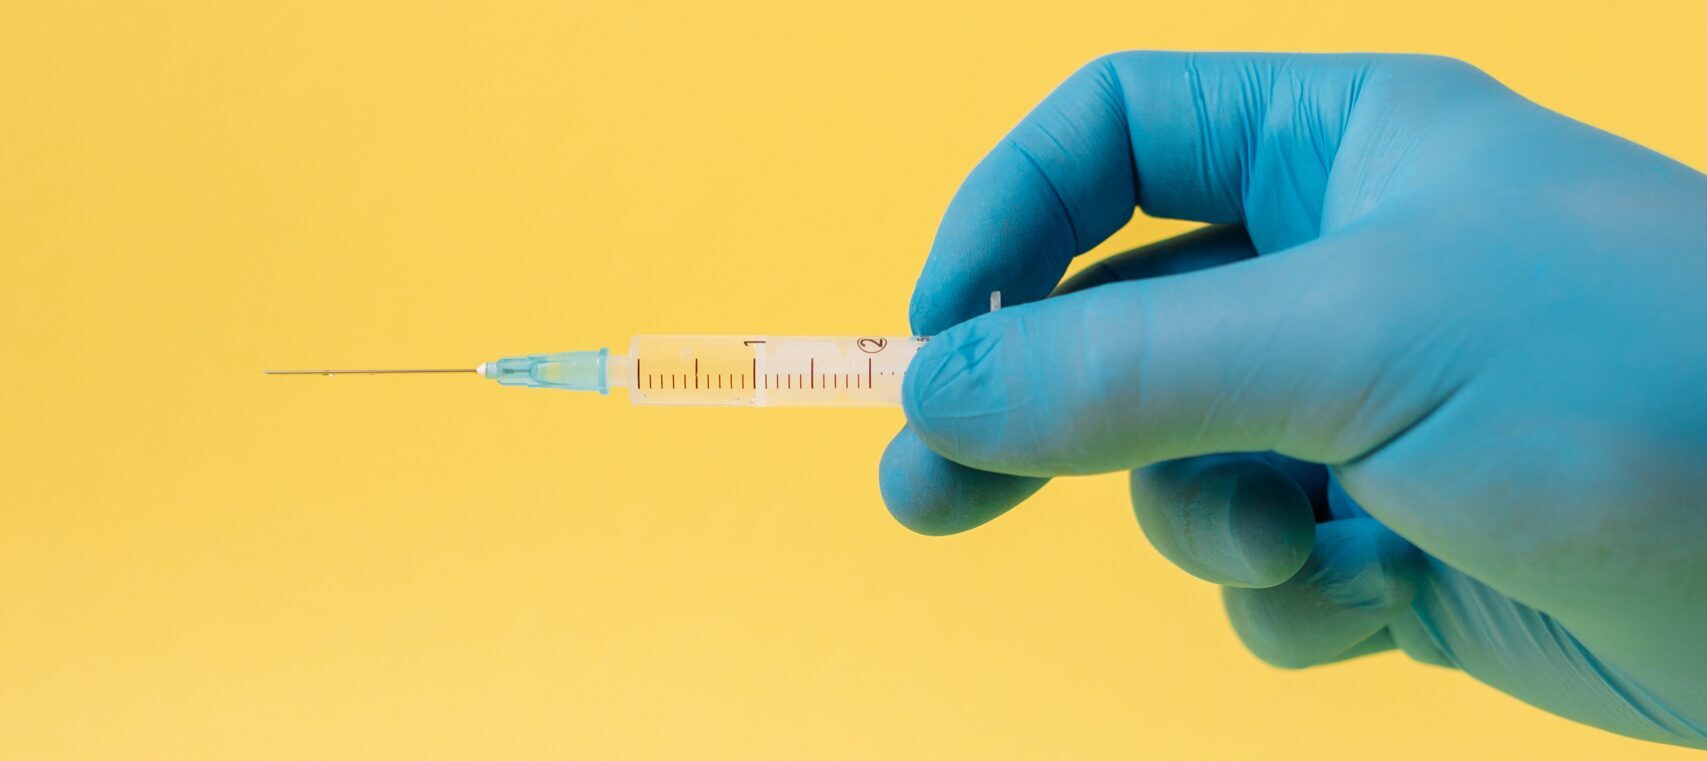 Hand wearing blue latex glove holding a filled syringe horizontally